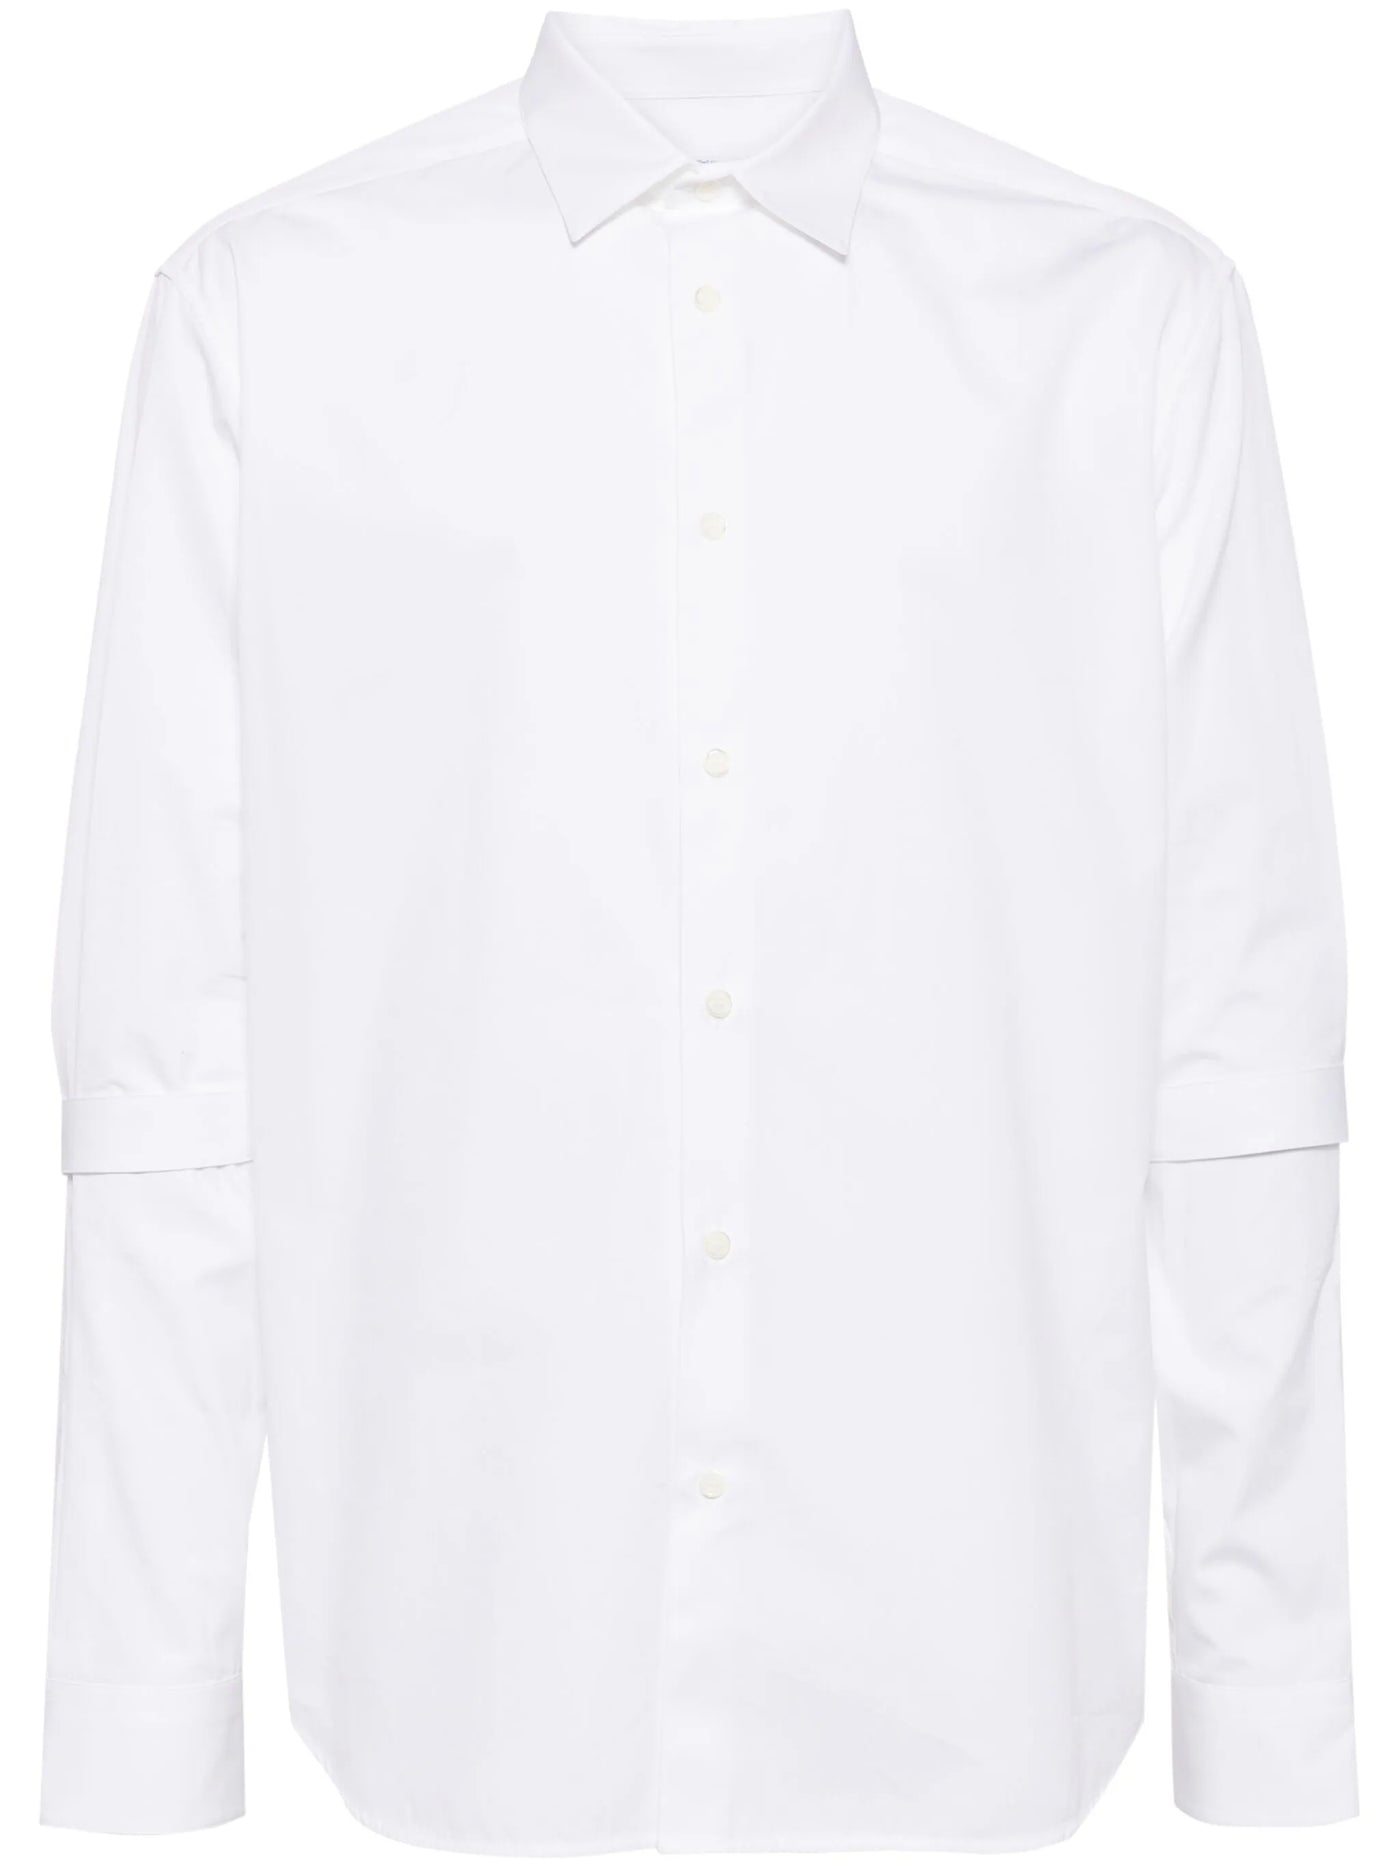 Off-White Ow tailored cotton shirt